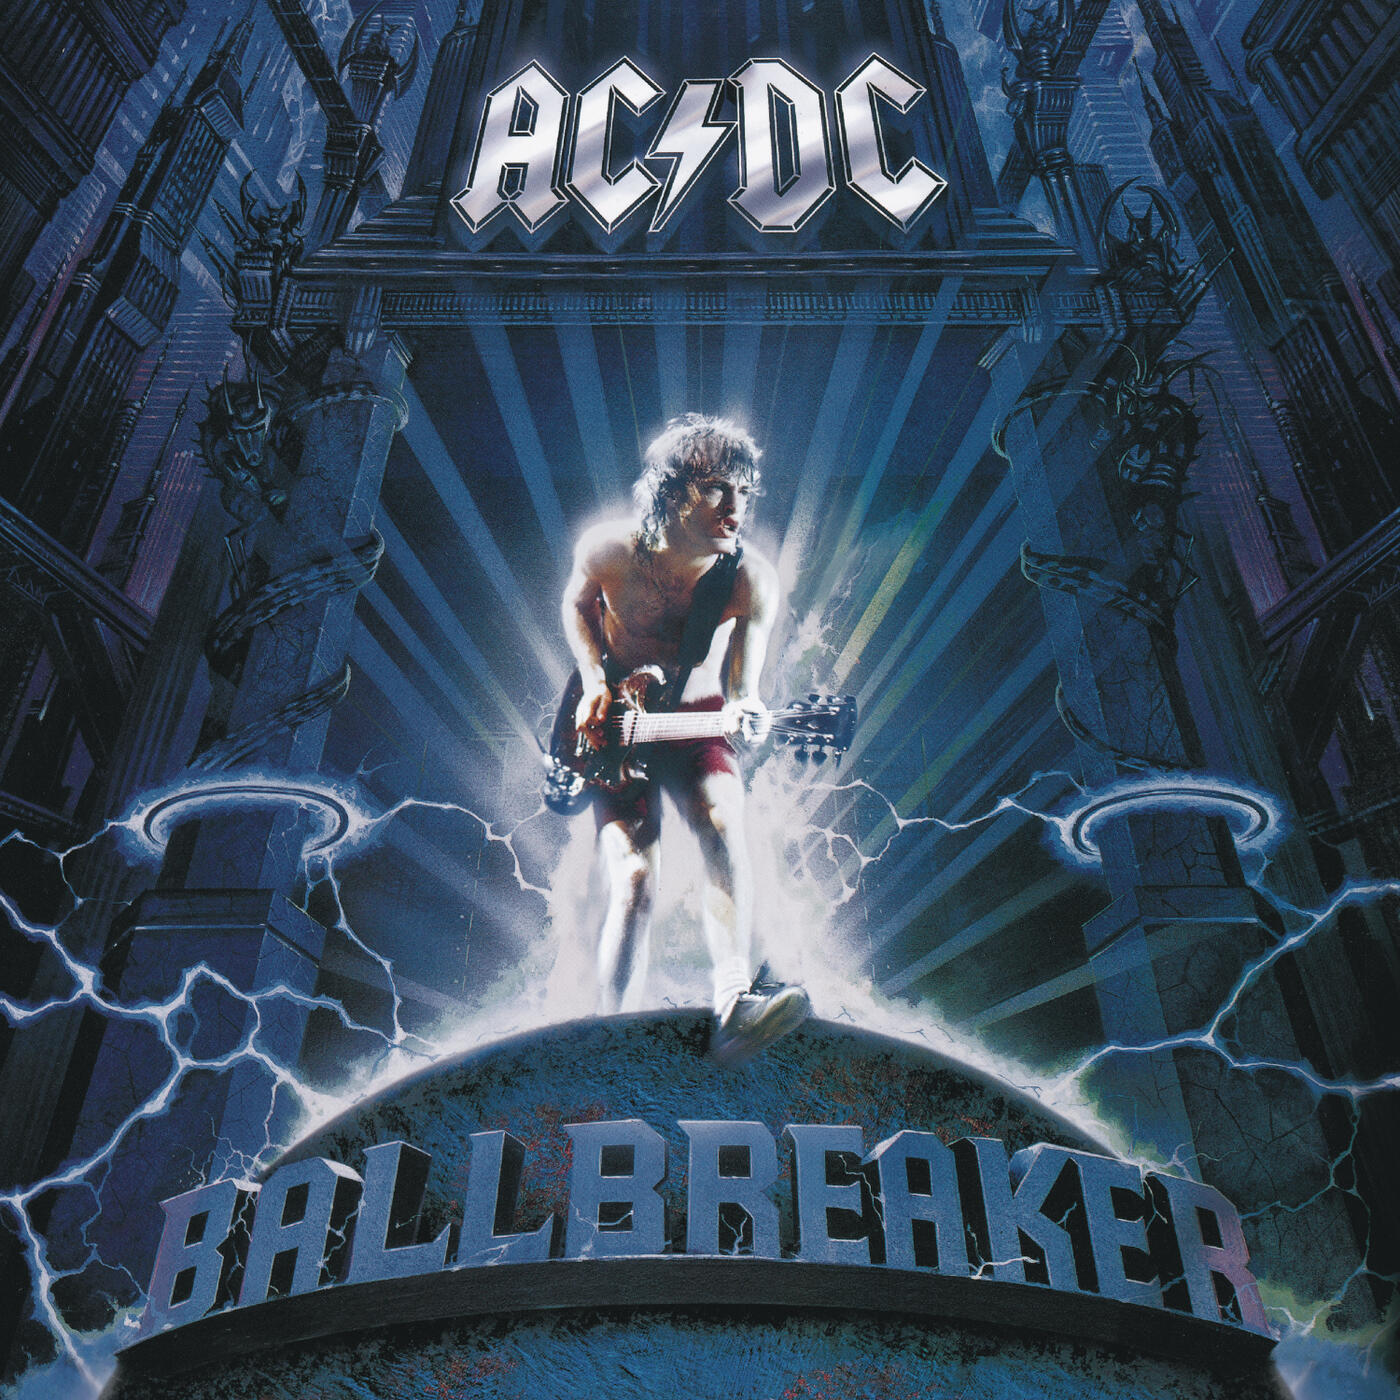 acdc ballbreaker tour opening act